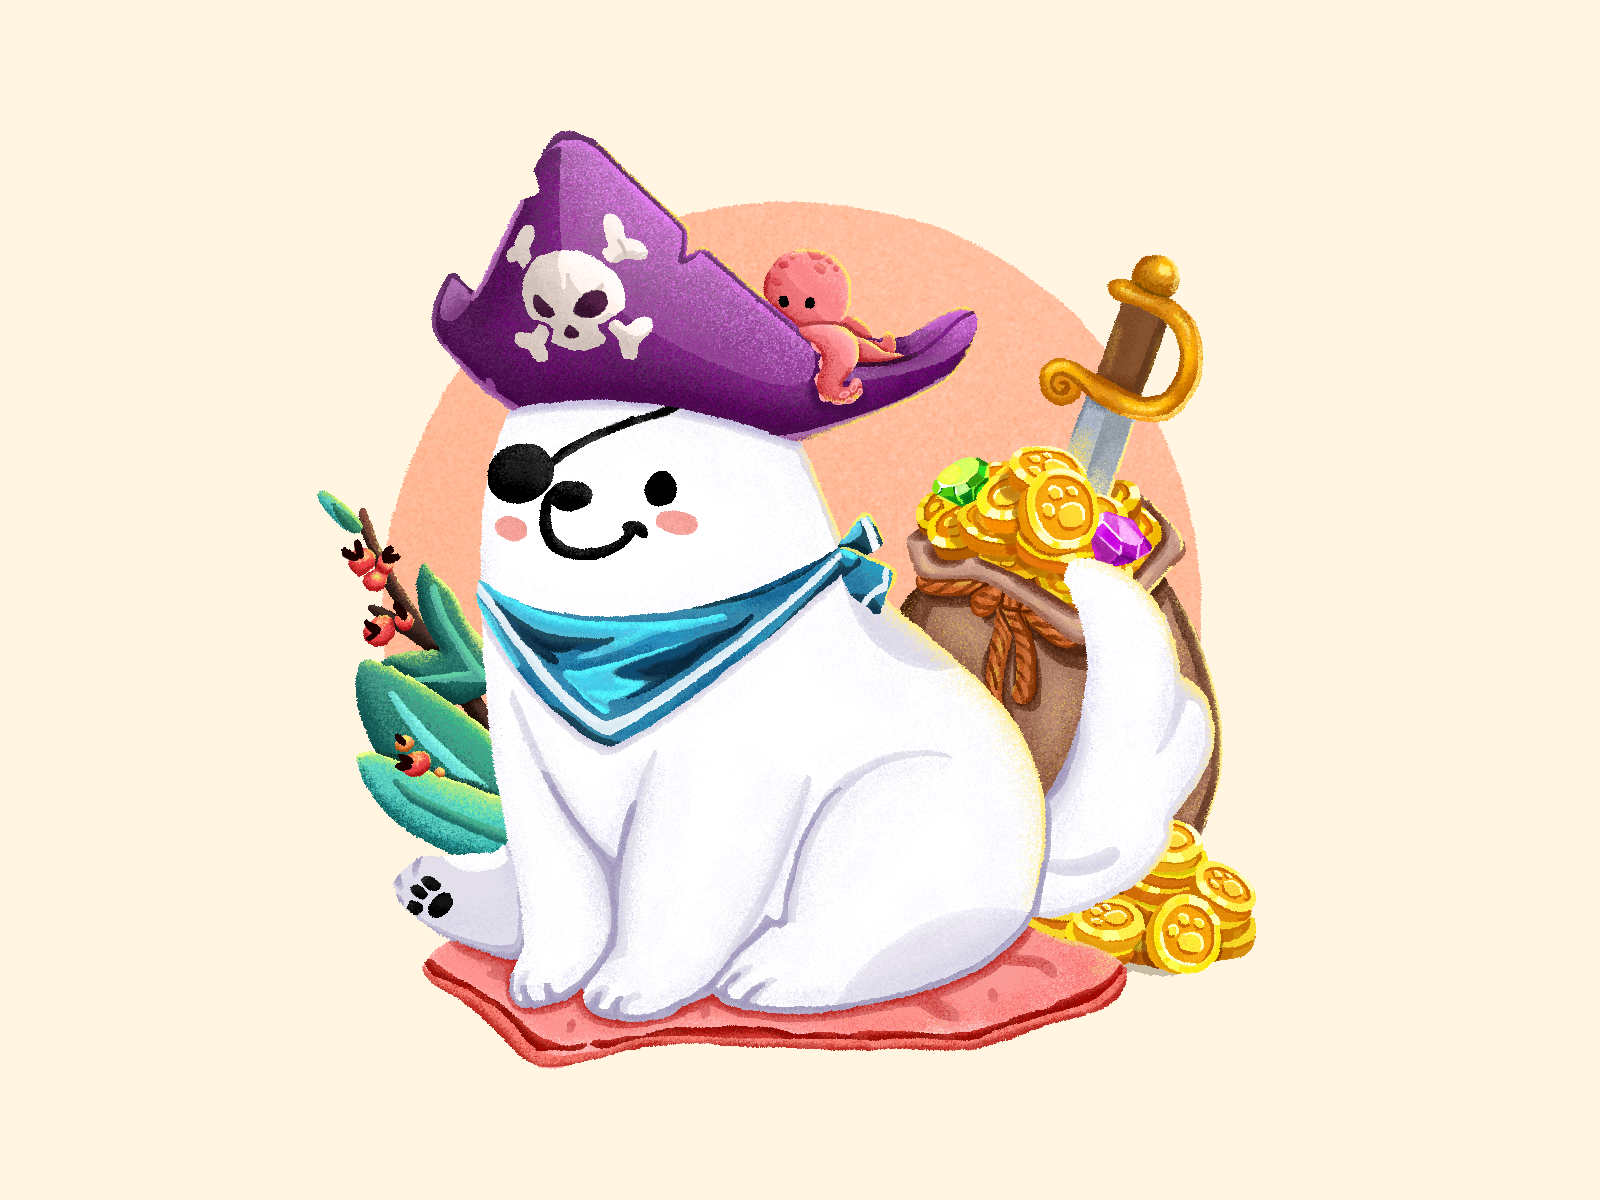 Adorable Puppy 3 cushion diamonds patch scarf pirate hat octopus plants pet dog puppy samoye treasure coin the sword pirate graphic design illustration